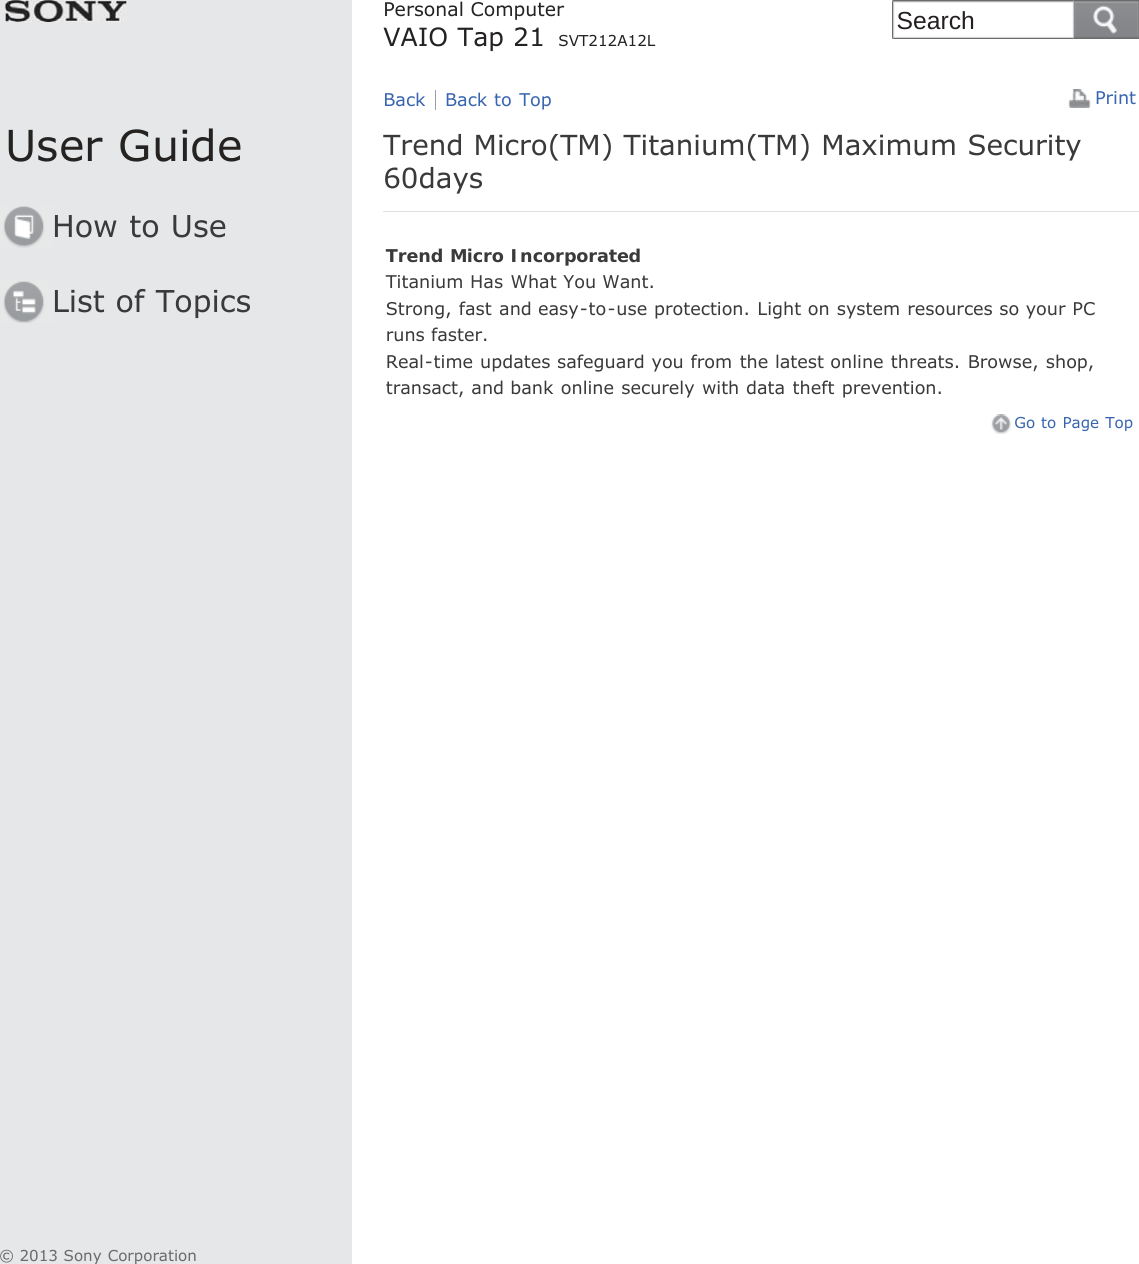 User GuideHow to UseList of TopicsPrintPersonal ComputerVAIO Tap 21 SVT212A12LTrend Micro(TM) Titanium(TM) Maximum Security60daysTrend Micro IncorporatedTitanium Has What You Want.Strong, fast and easy-to-use protection. Light on system resources so your PCruns faster.Real-time updates safeguard you from the latest online threats. Browse, shop,transact, and bank online securely with data theft prevention.Go to Page TopBack Back to Top© 2013 Sony CorporationSearch